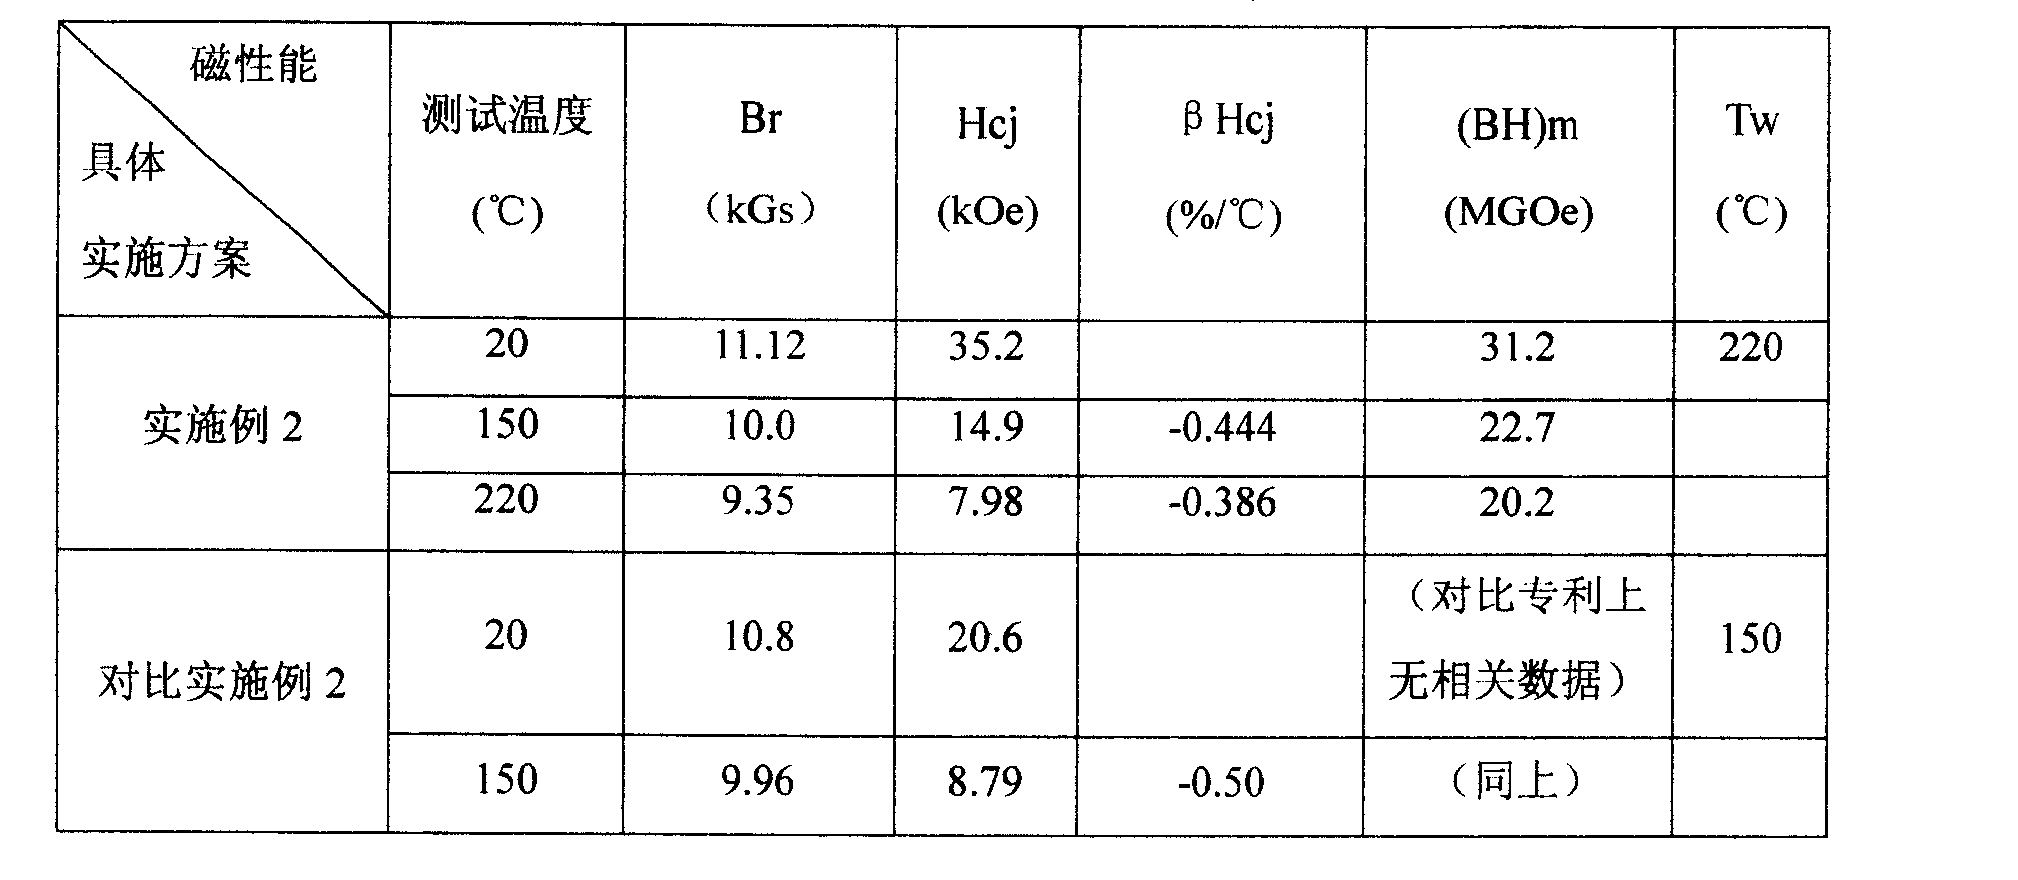 Ultra-high coercive force sintered Nd-Fe-B magnetic material and preparing process thereof